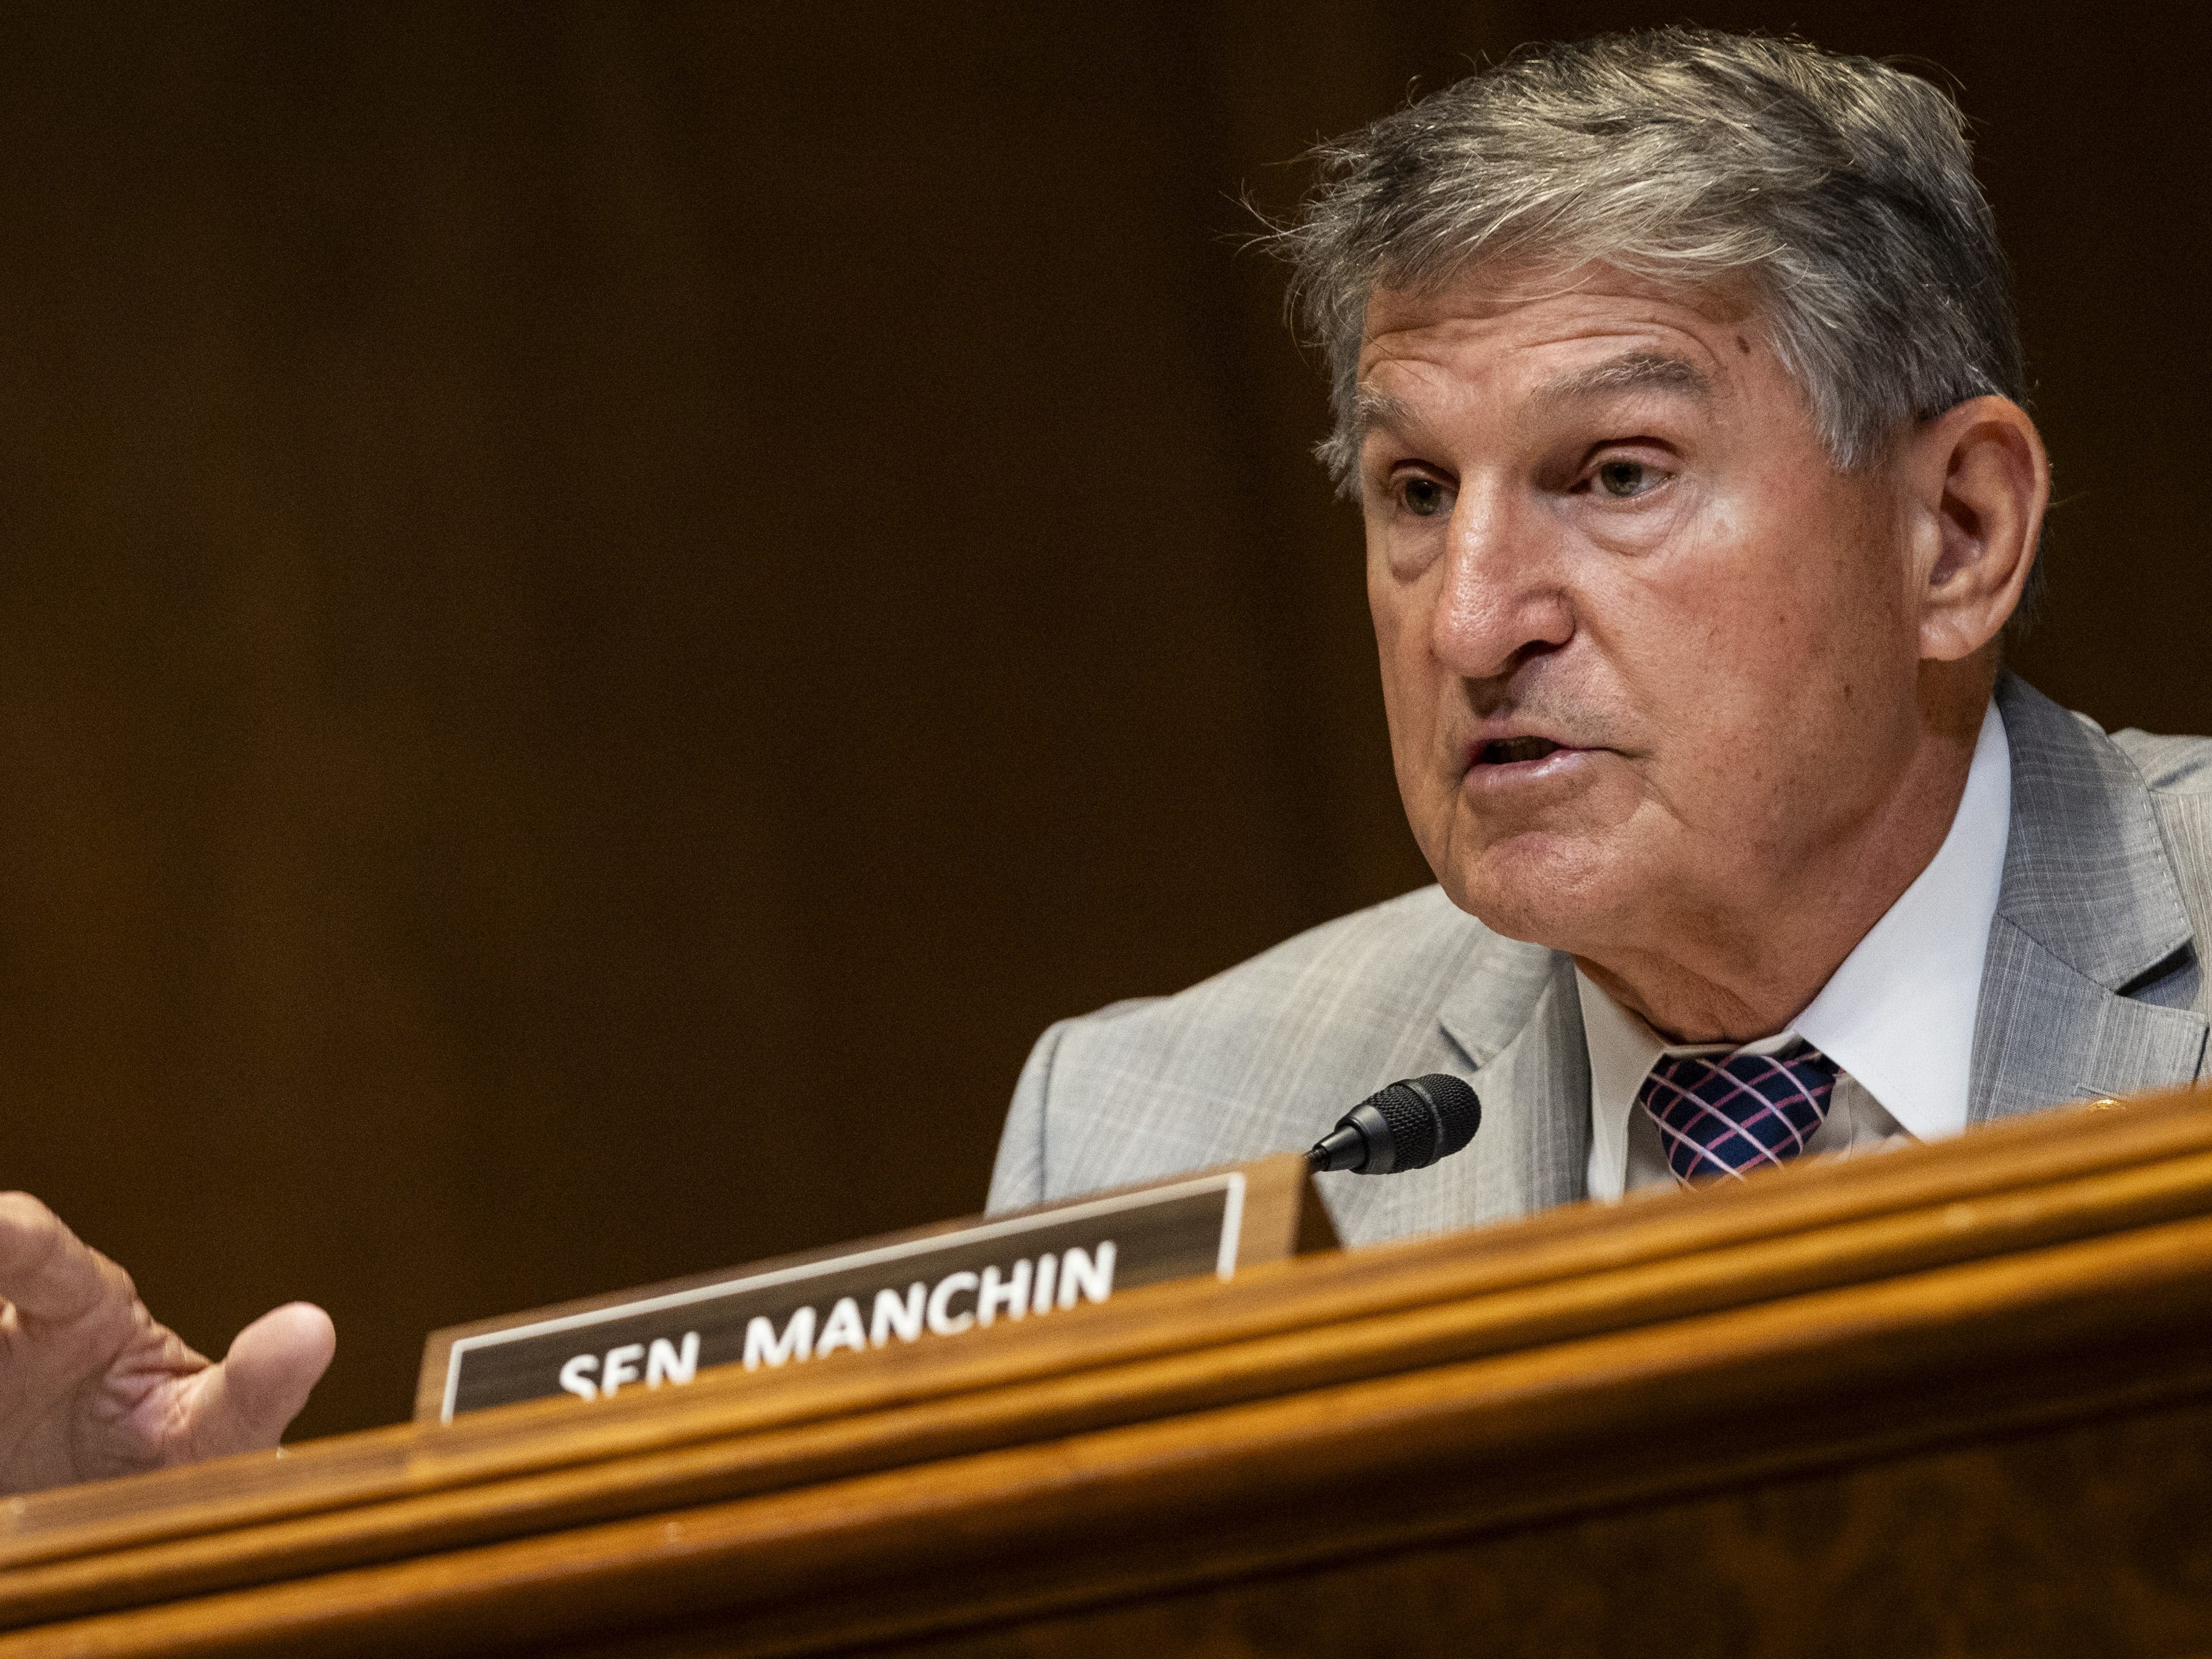 Joe Manchin calls on Biden to exit the presidential race and 'pass the torch to a new generation'